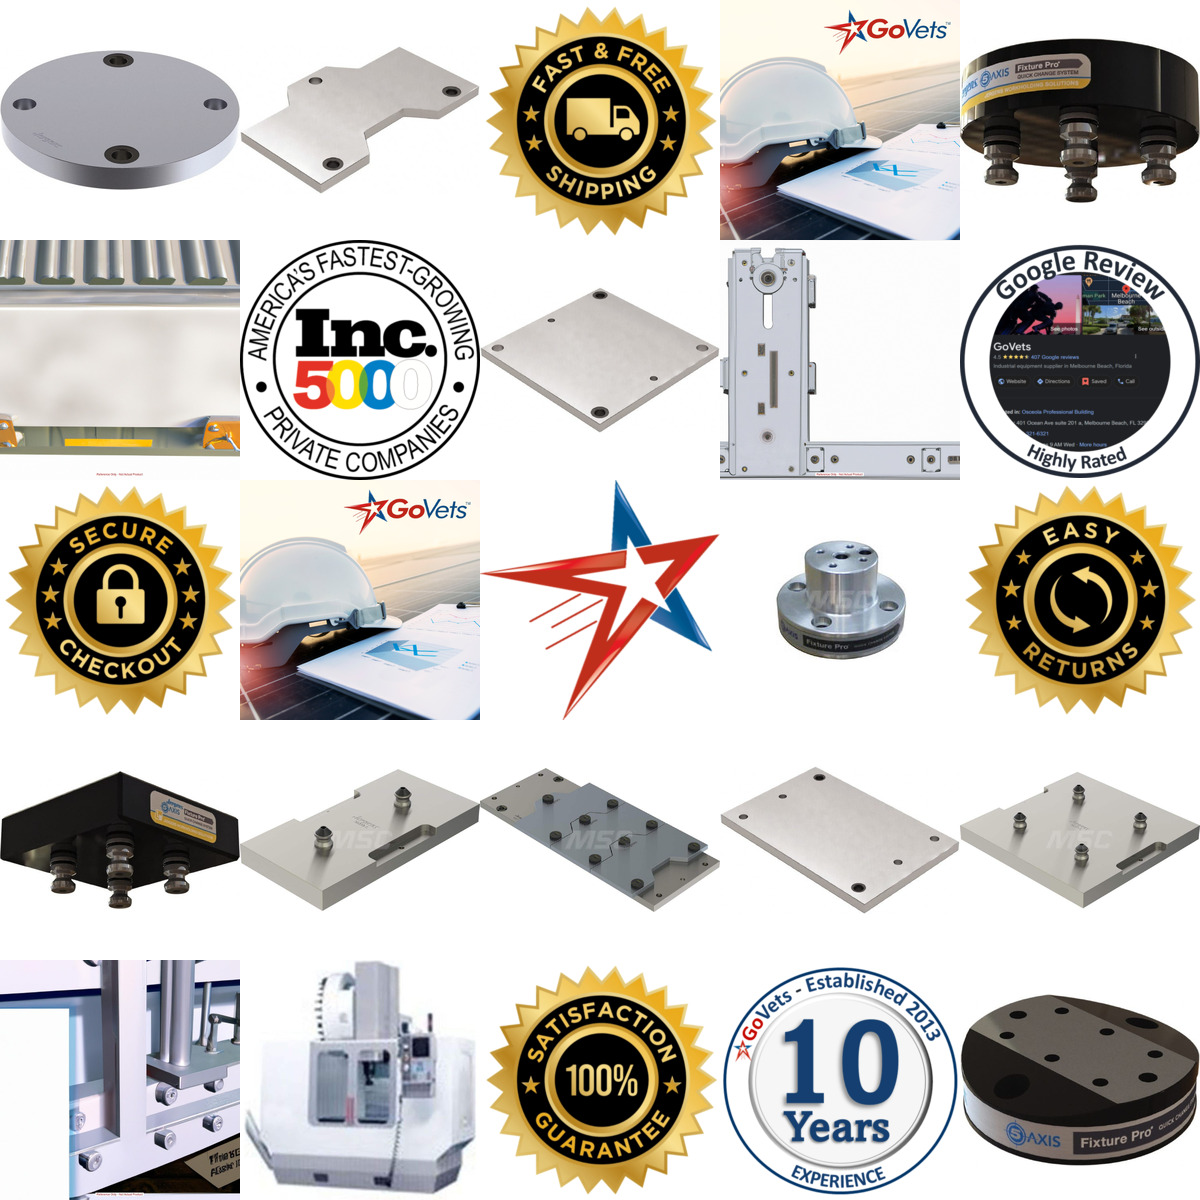 A selection of Fixture Plates products on GoVets